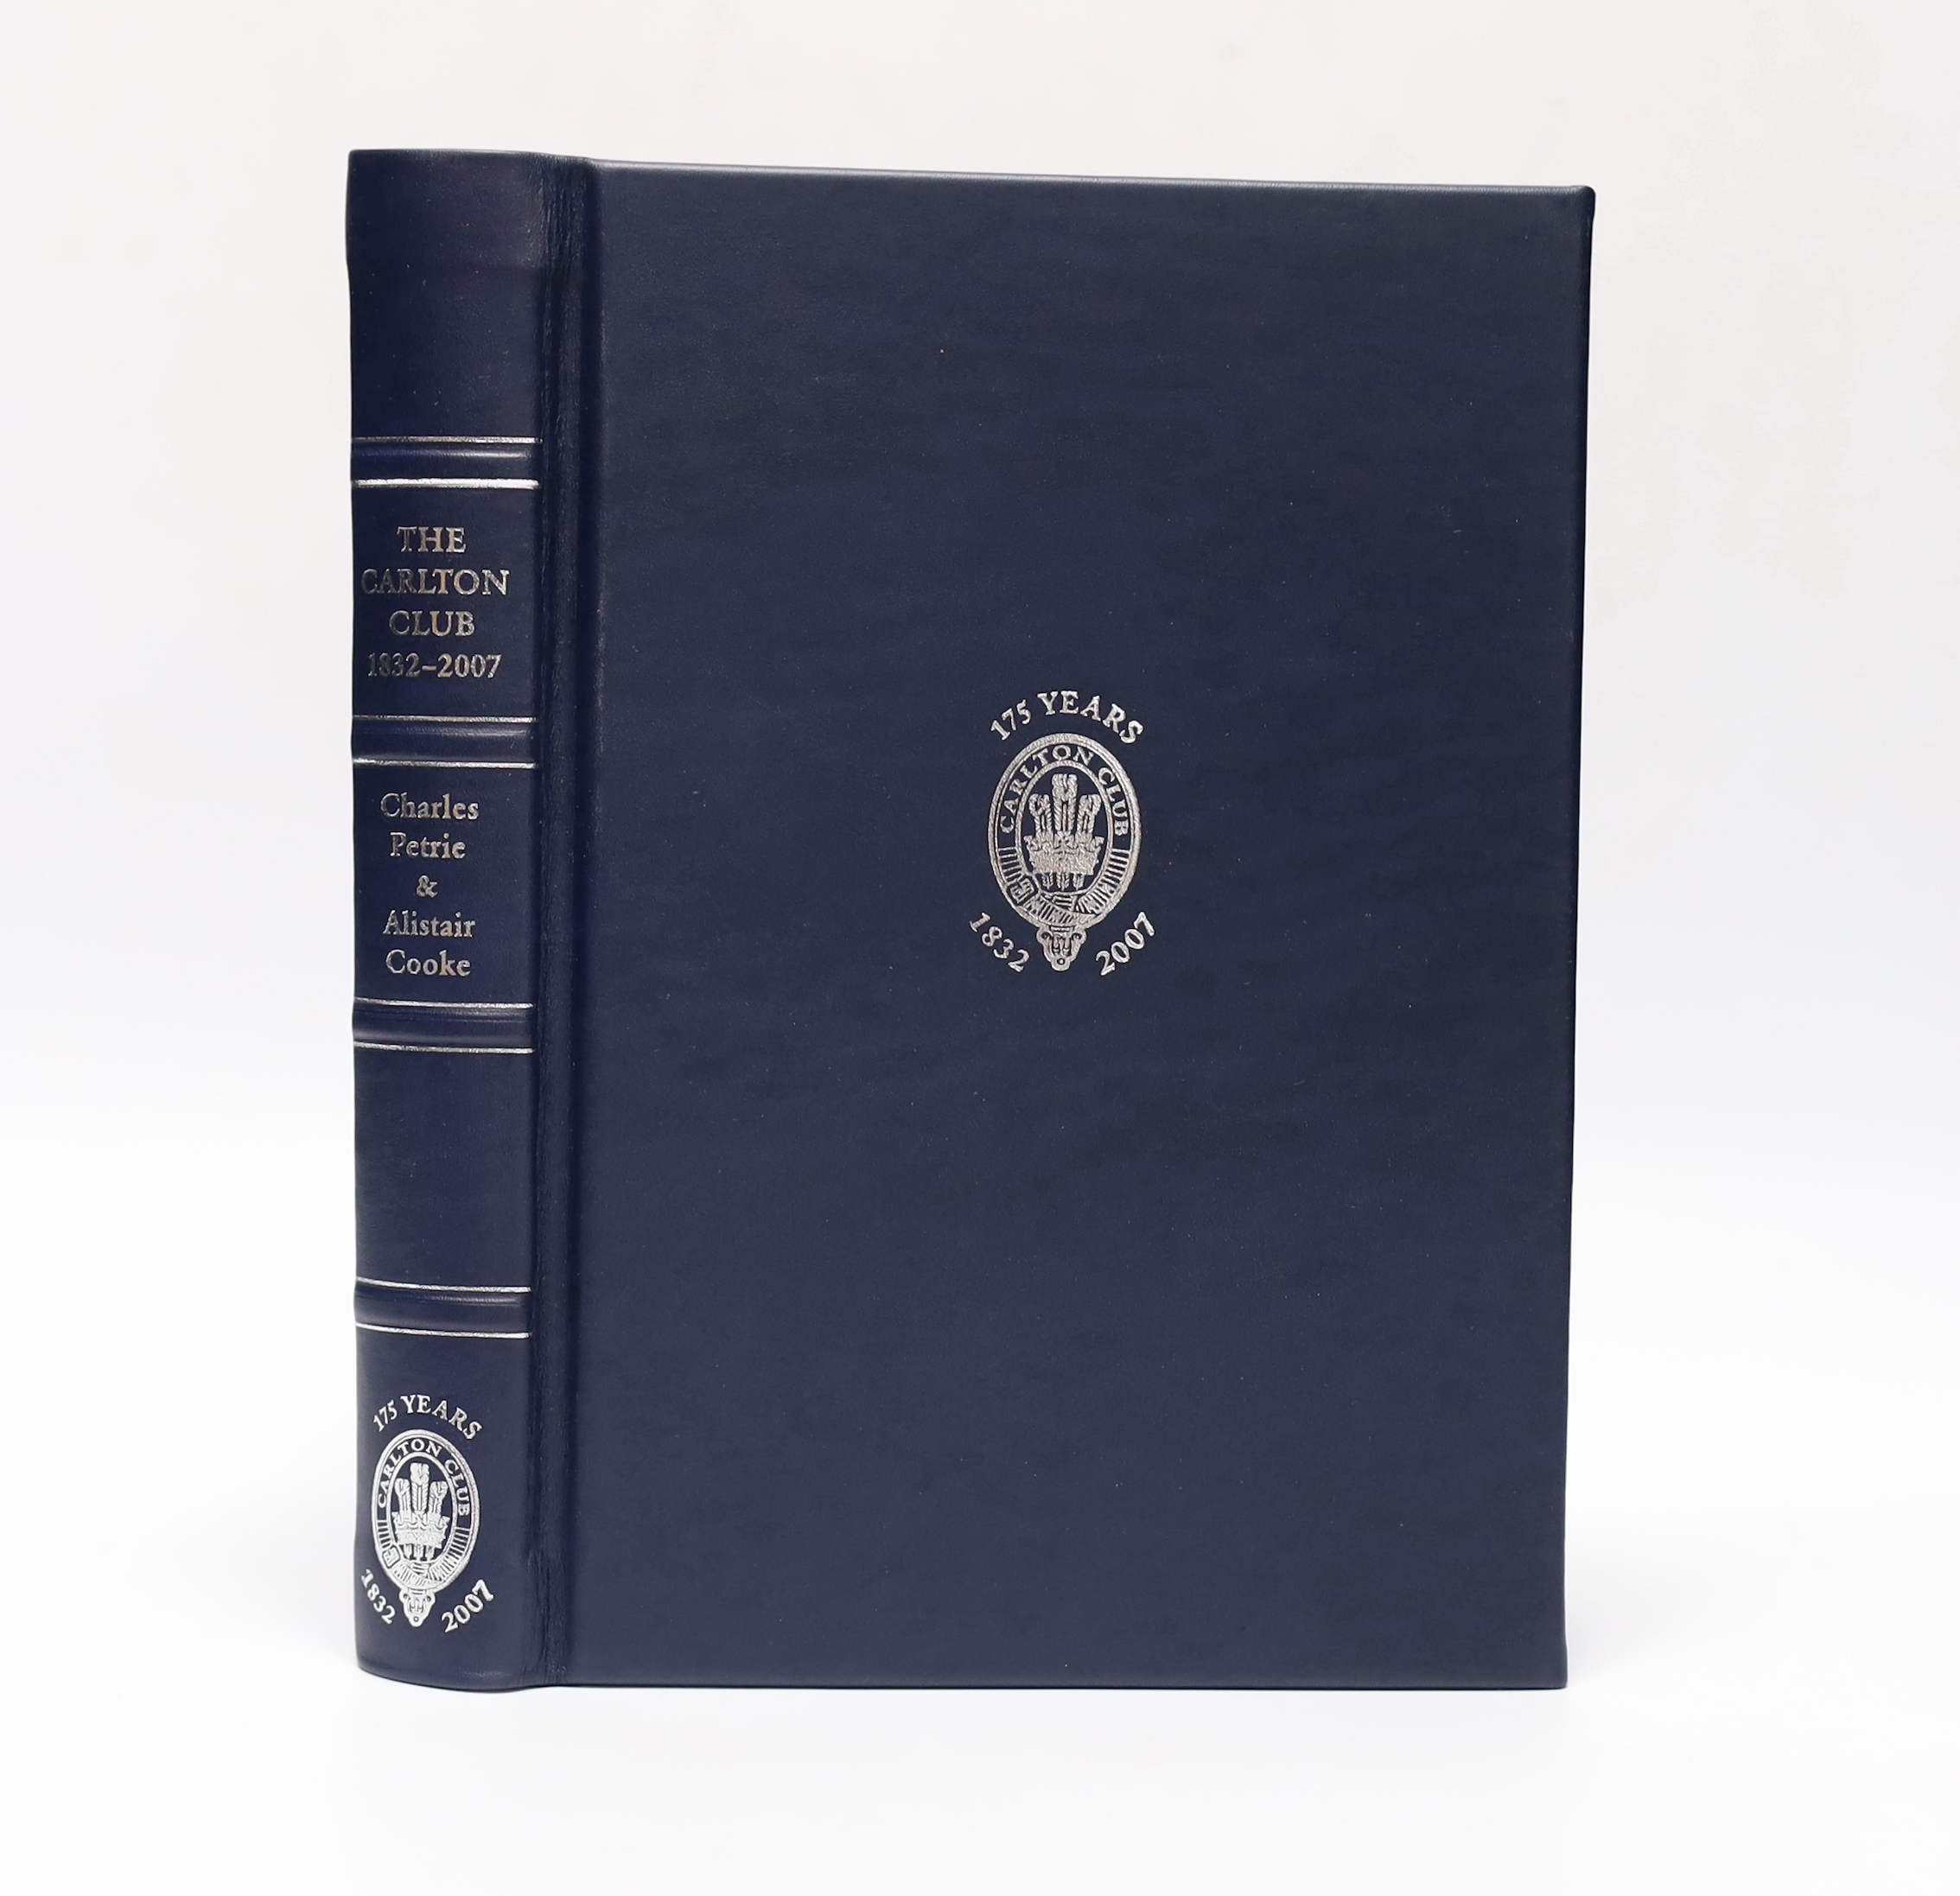 Petrie, Sir Charles and Cooke, Alistair - The Carlton Club, 1832-2007. Limited Edition (of 175 numbered copies, signed by Margaret Thatcher and the Marquess of Salisbury). 12 coloured plates; Oxford blue silver gilt leat